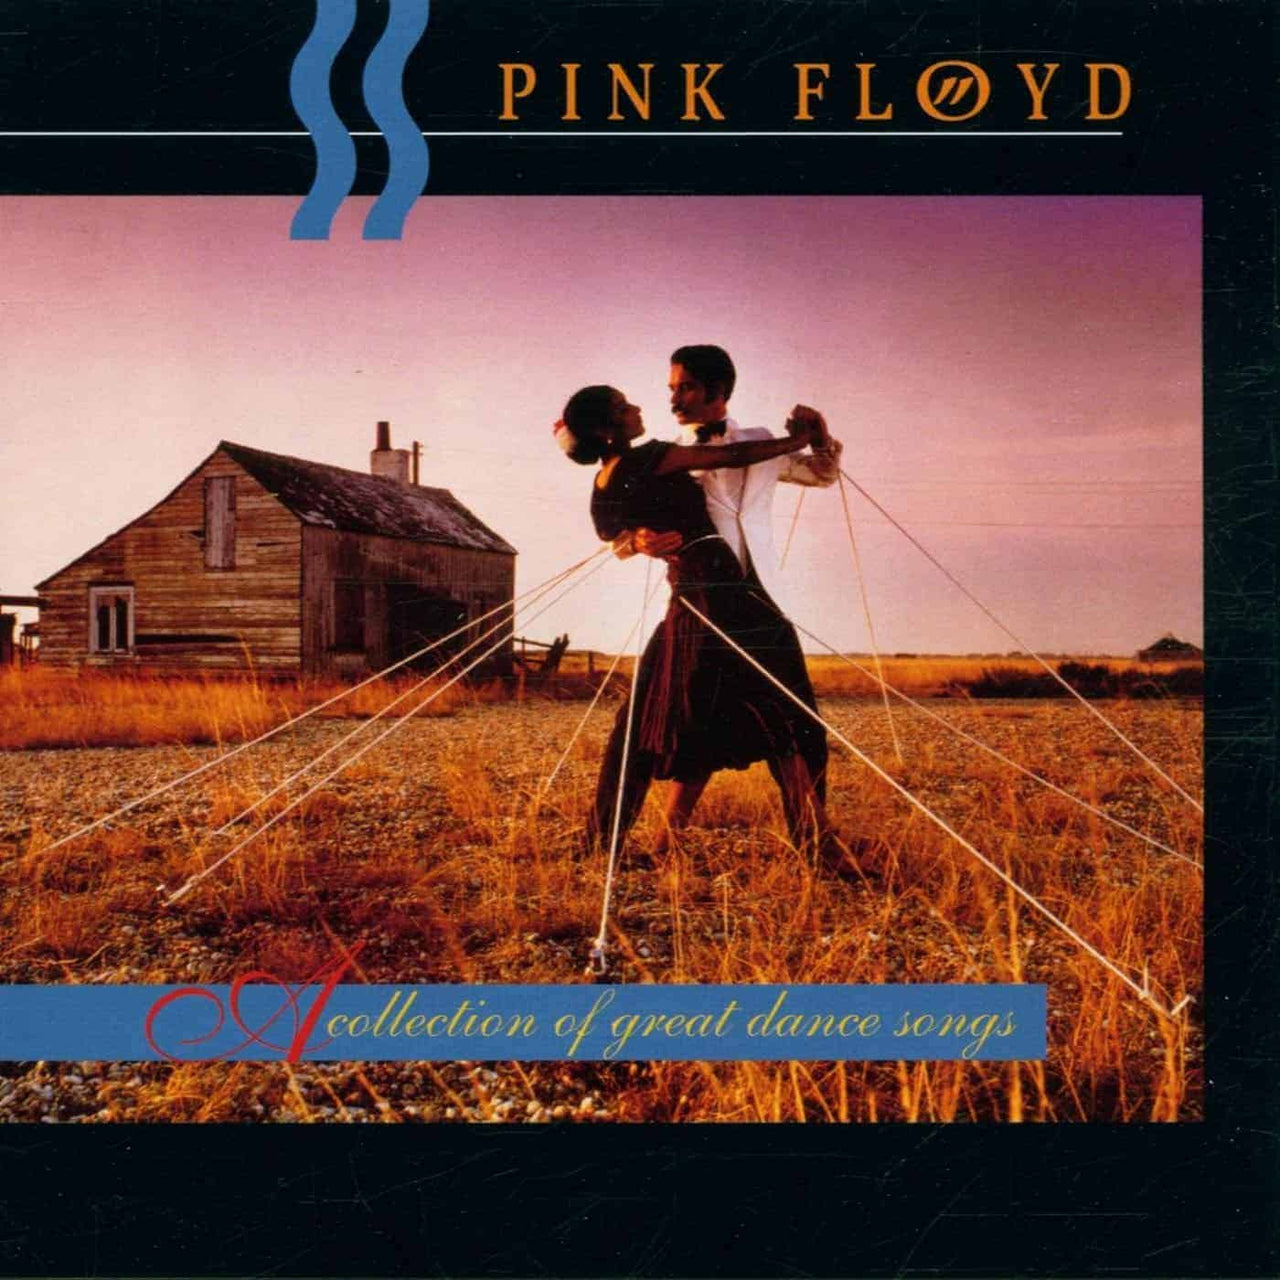 PINK FLOYD - A COLLECTION OF GREAT DANCE SONGS (1LP/180g/2017)